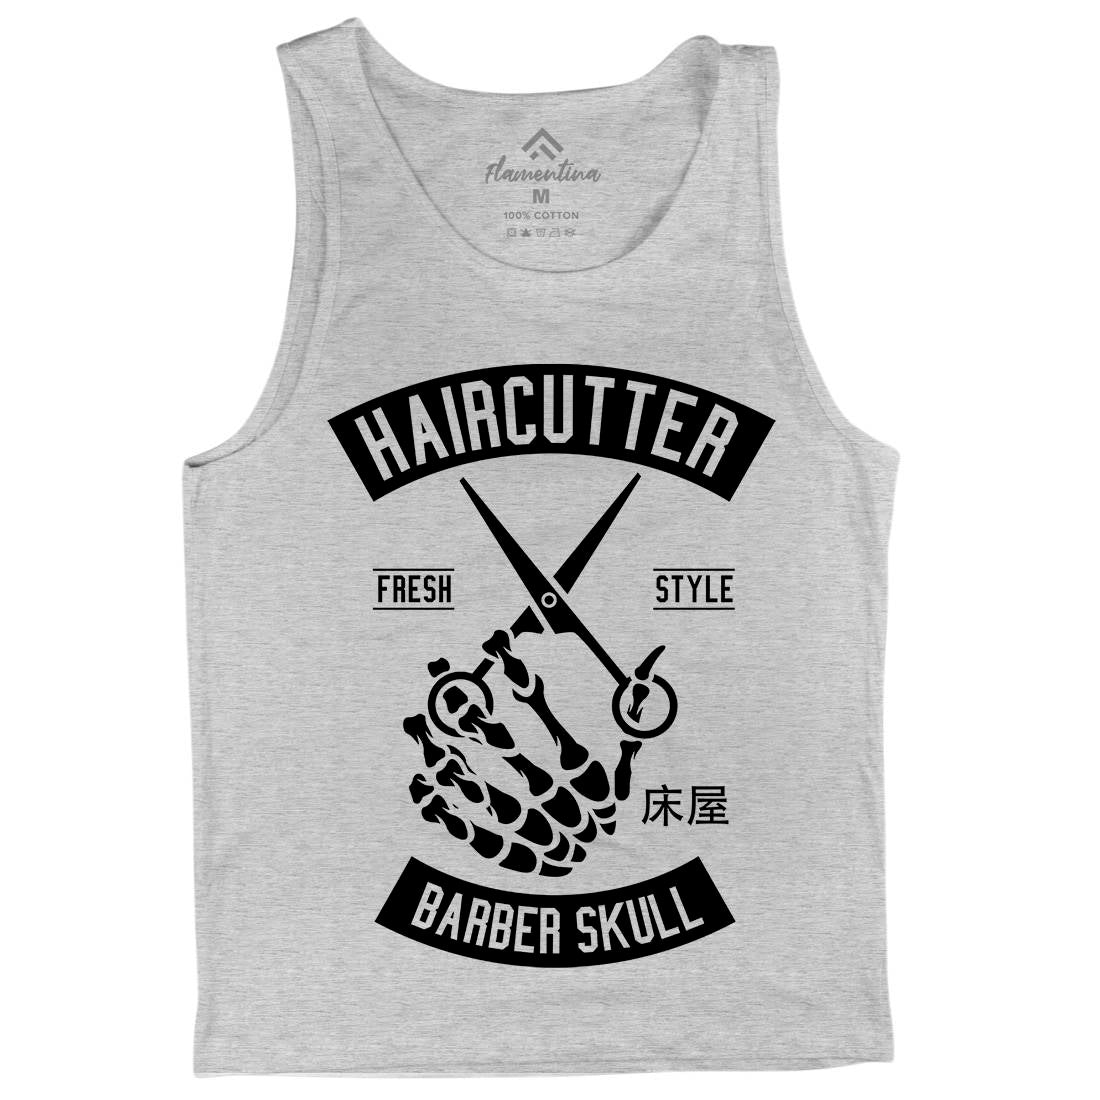 Haircutter Mens Tank Top Vest Barber A237